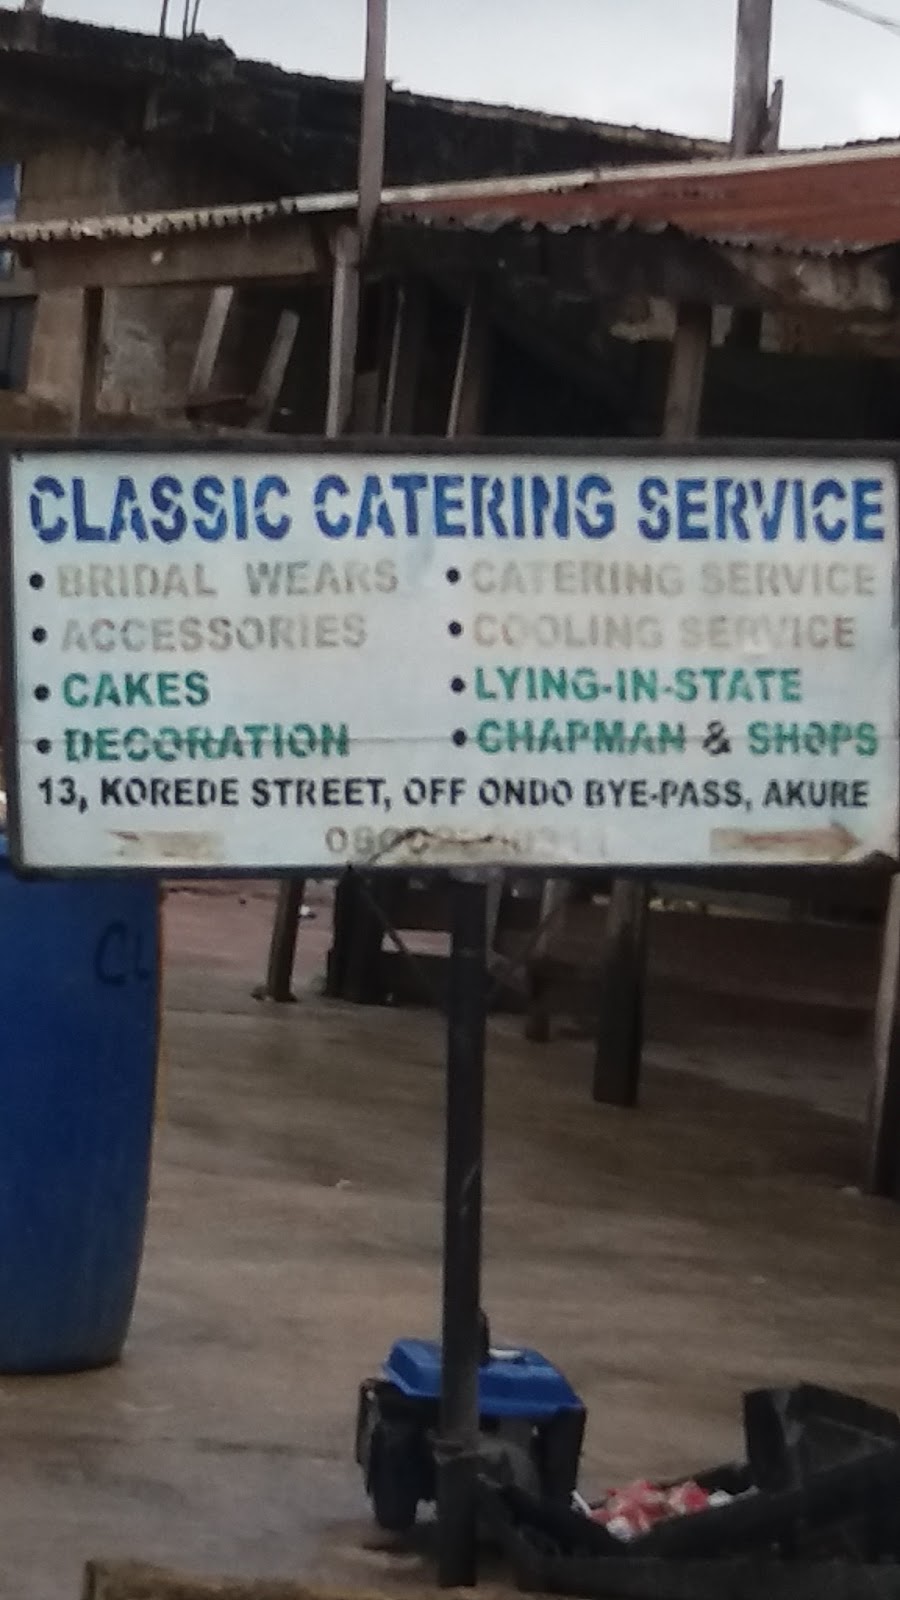 Classic Catering Service